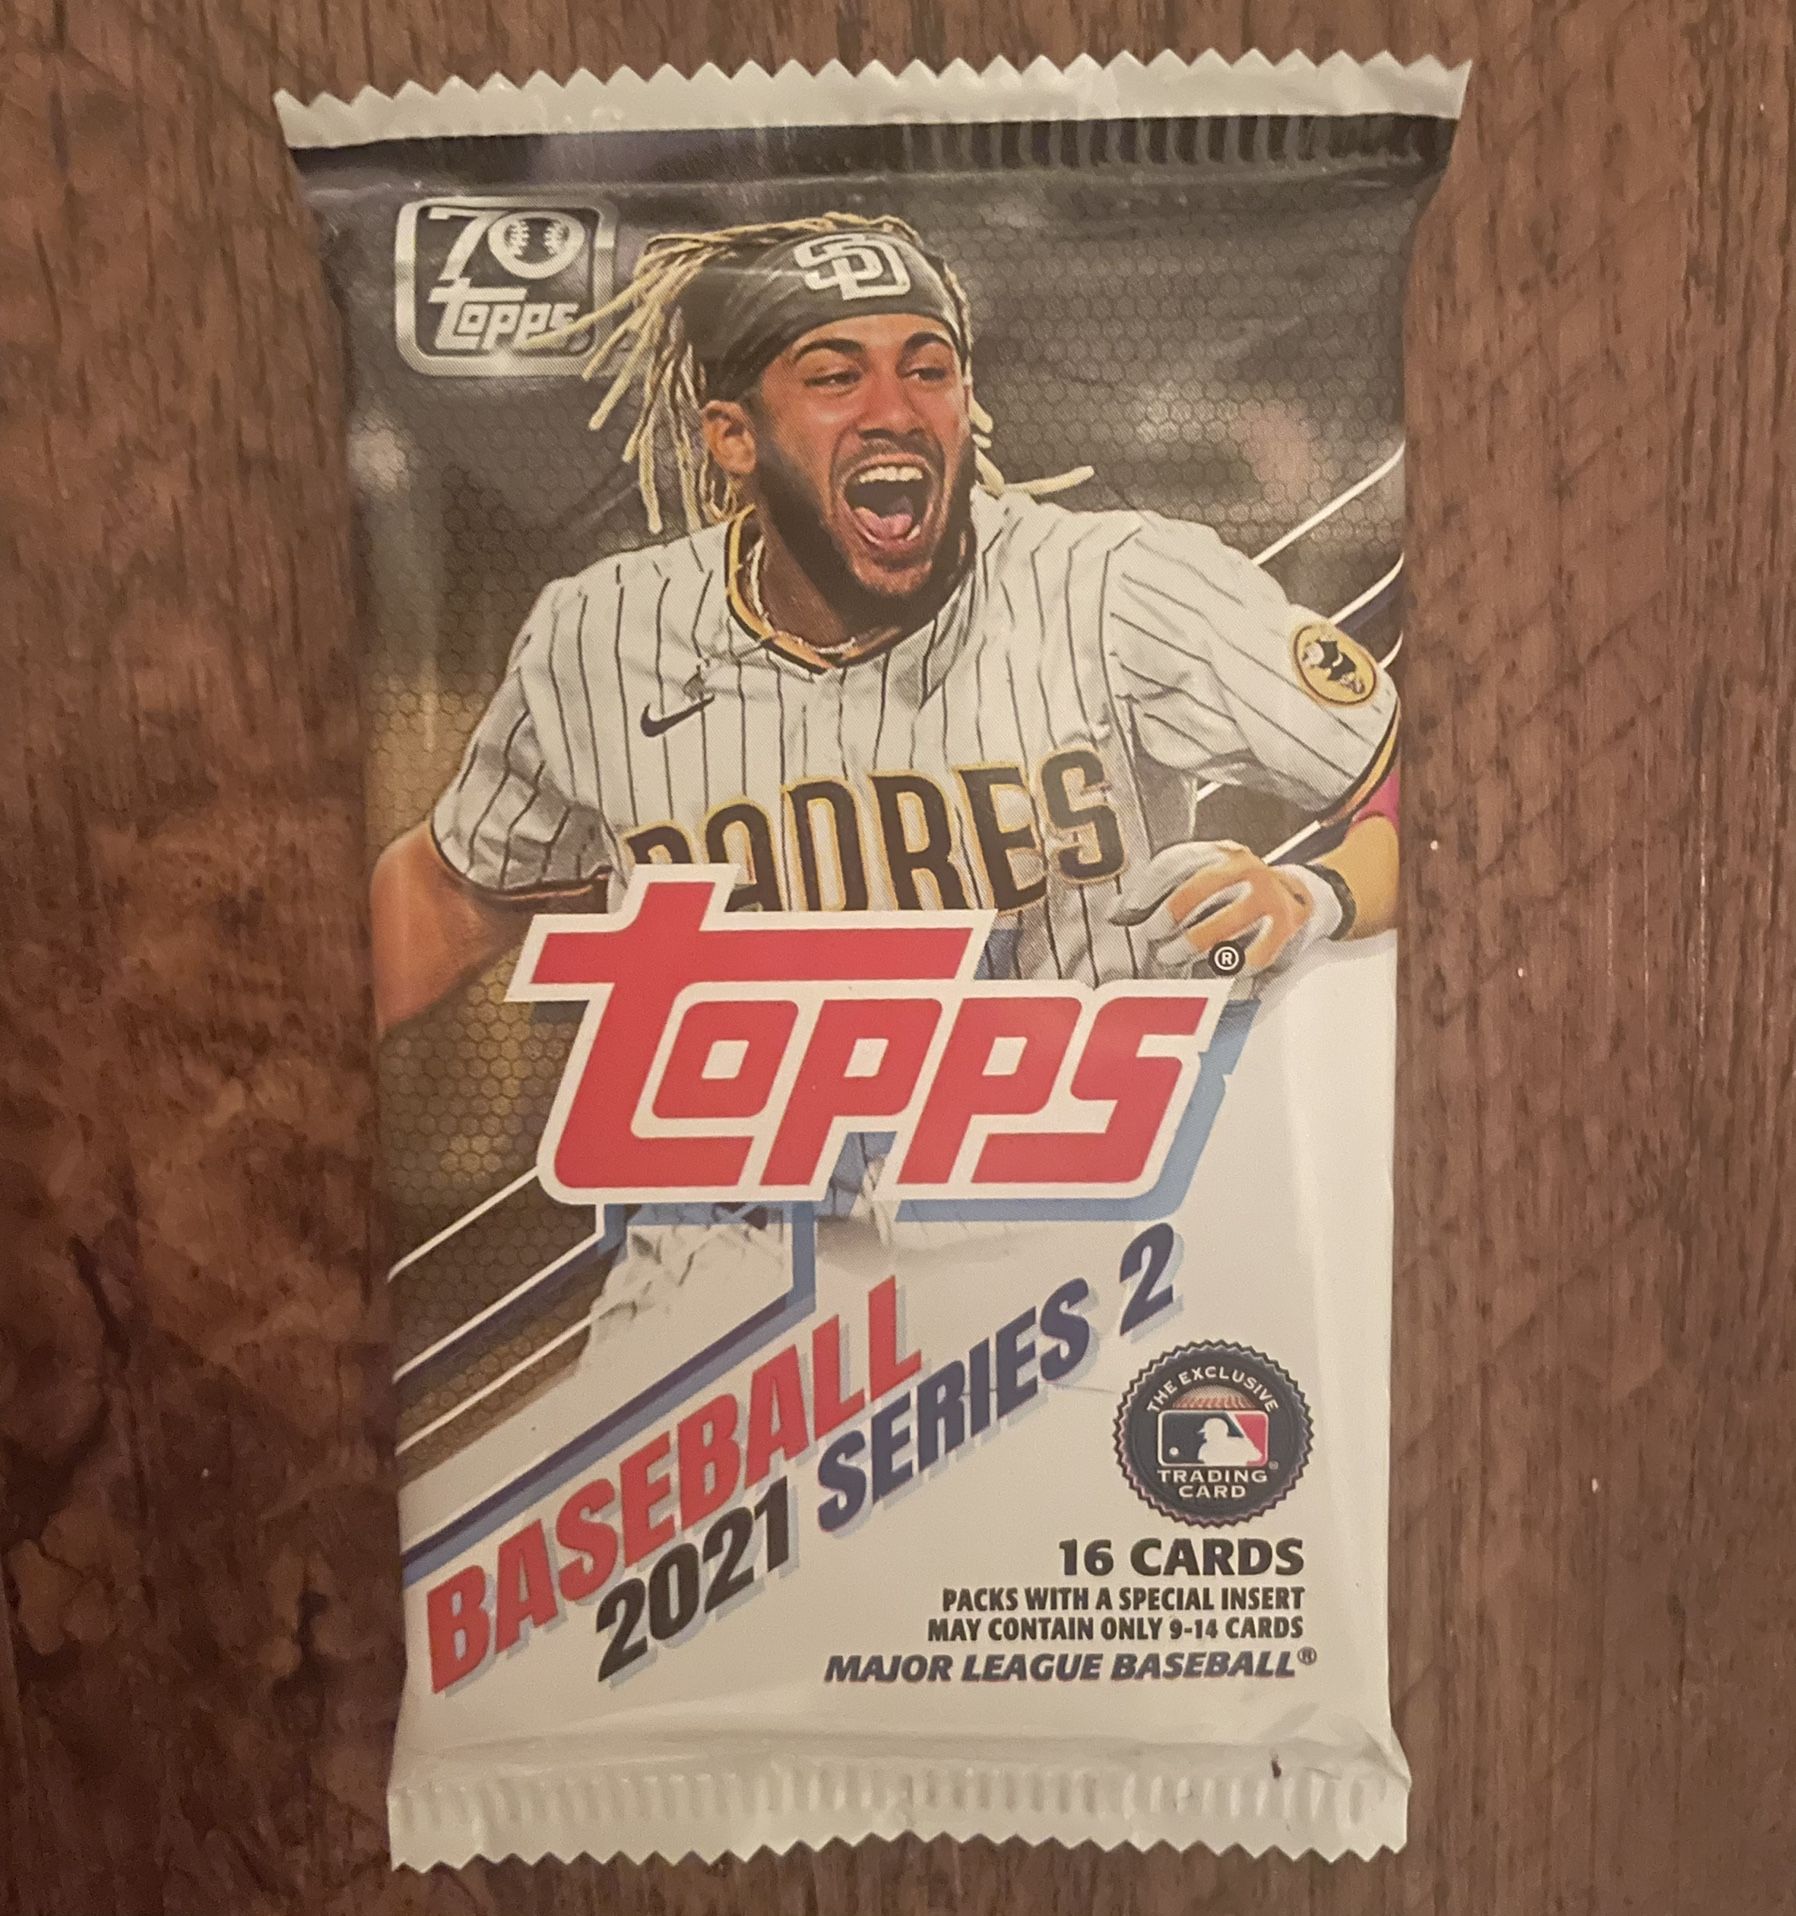 2021 Topps Baseball Series 2 - 16 Card Cello Pack - Factory Sealed